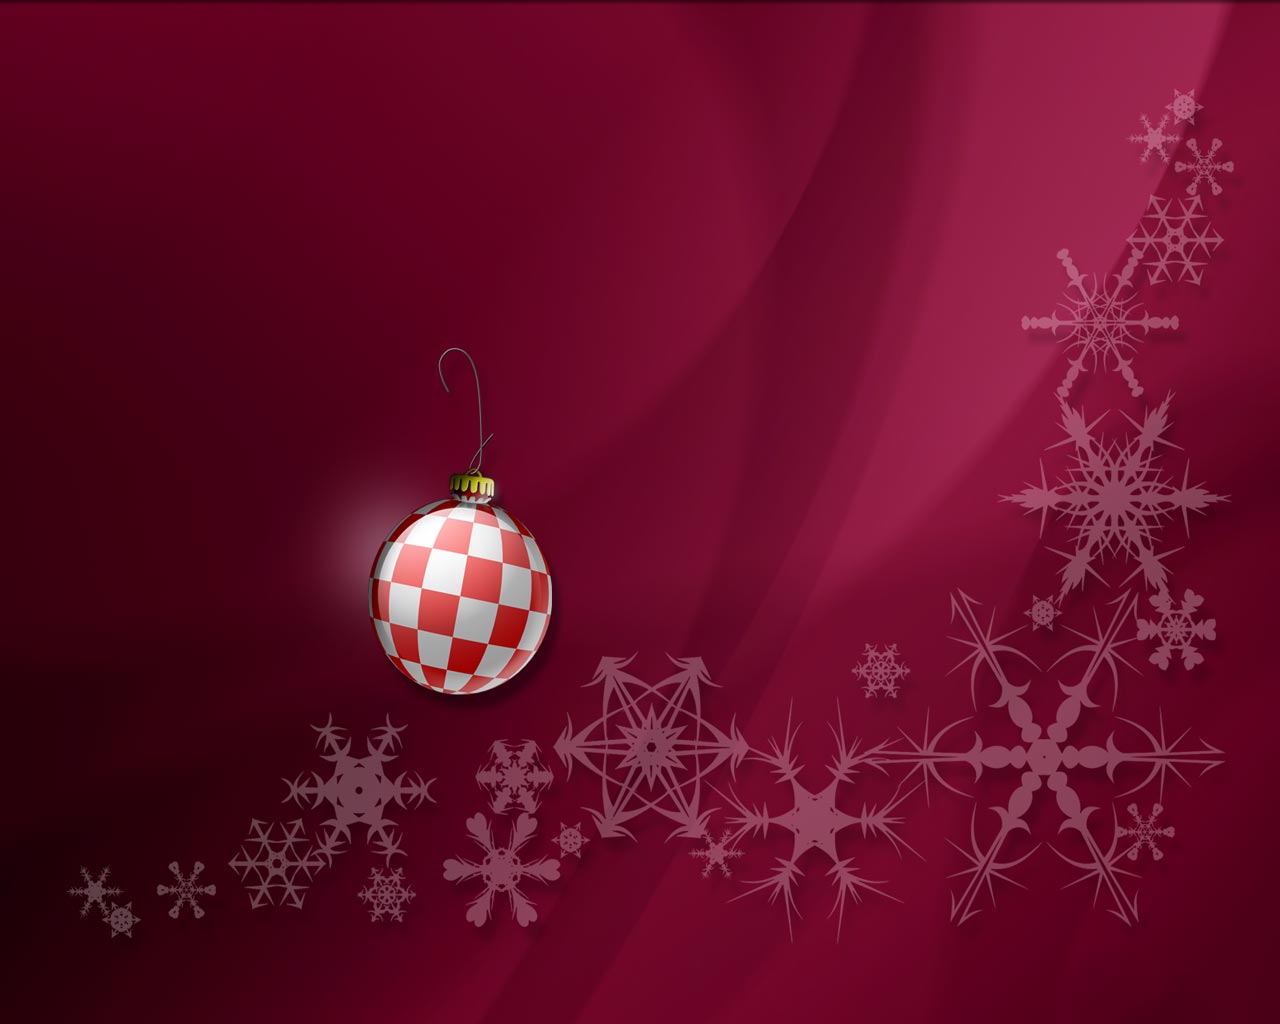 Holiday Wallpapers Group   Christmas Background 930568 1280x1024